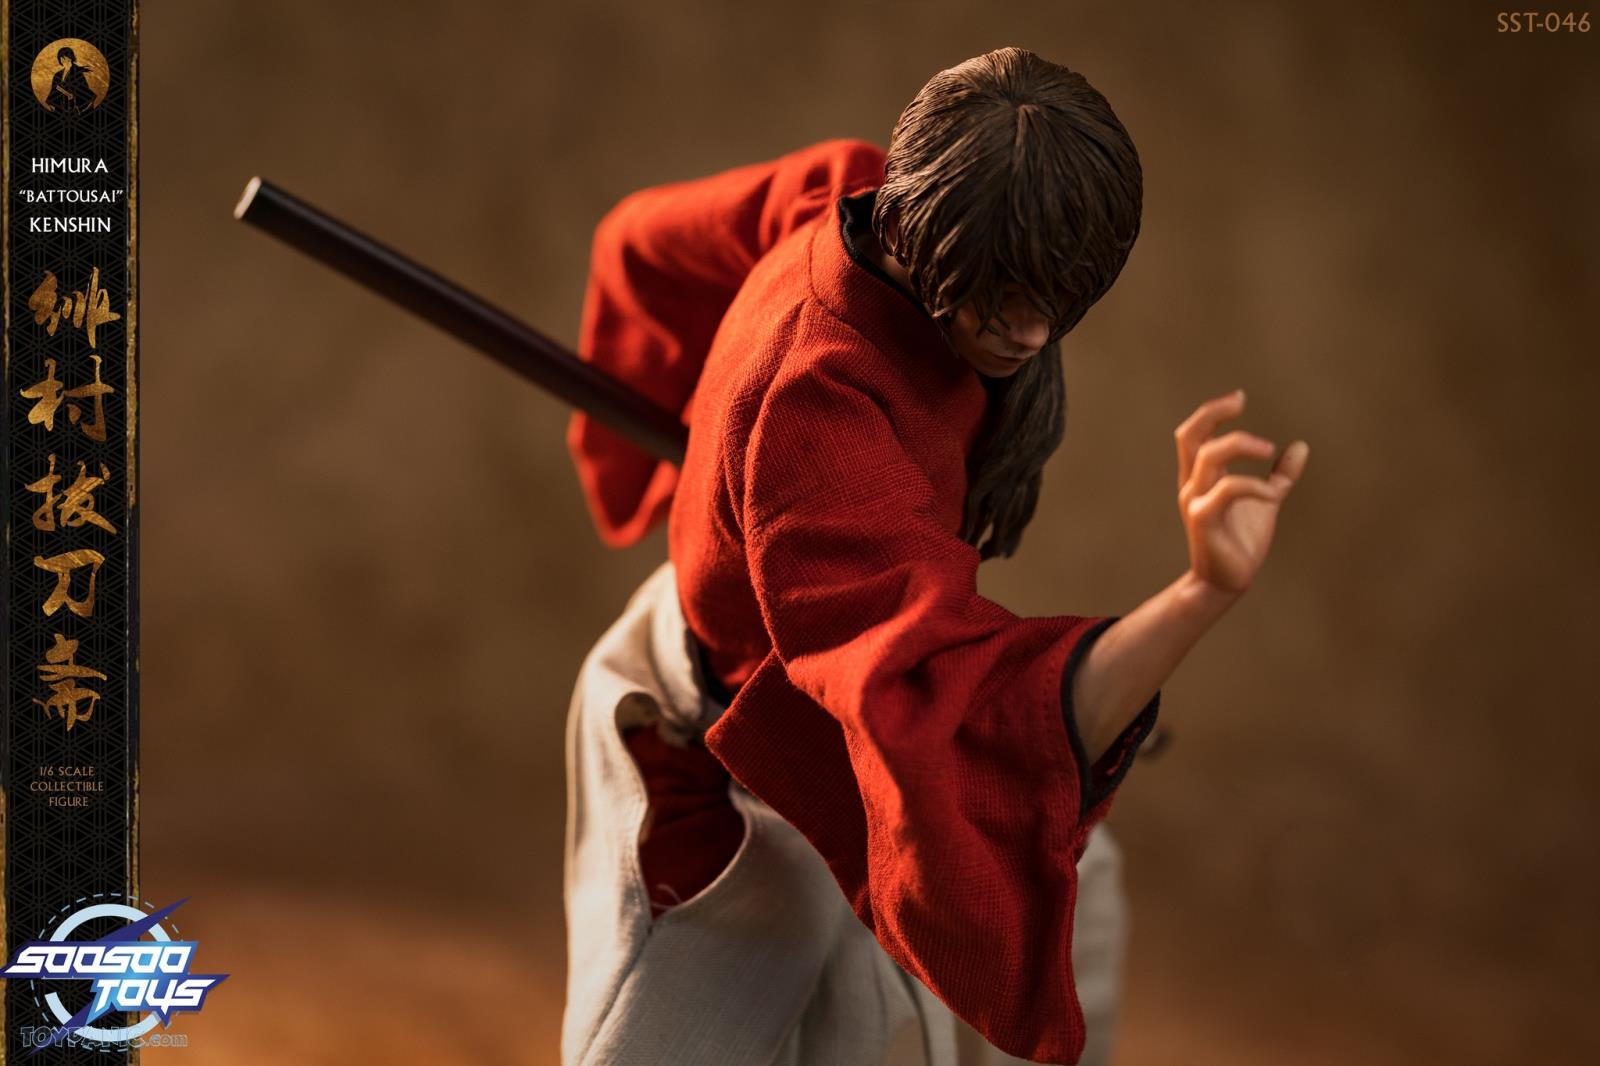 NEW PRODUCT: 1/6 scale Rurouni Kenshin Collectible Figure from SooSooToys 712202251231PM_2000183